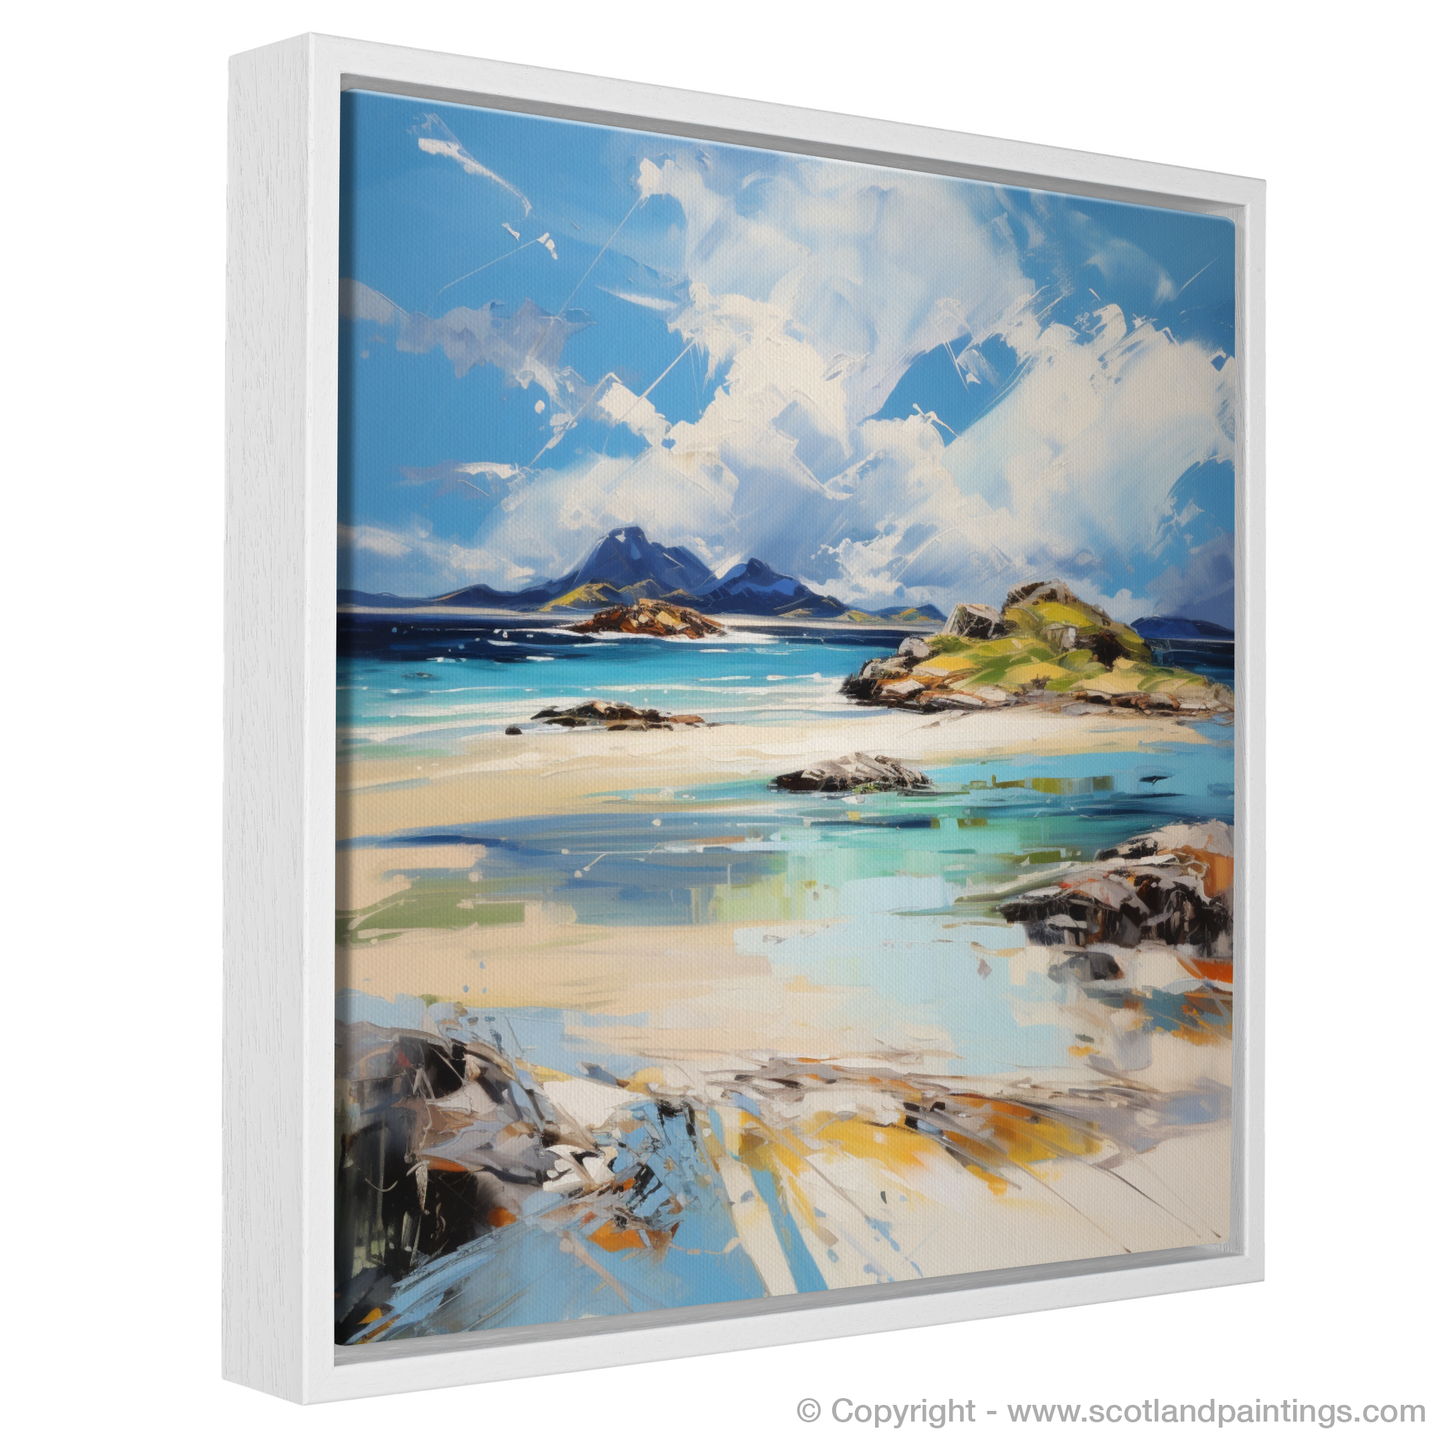 Painting and Art Print of Camusdarach Beach, Arisaig entitled "Camusdarach Beach Whispers: An Expressionist Ode to Scottish Shores".